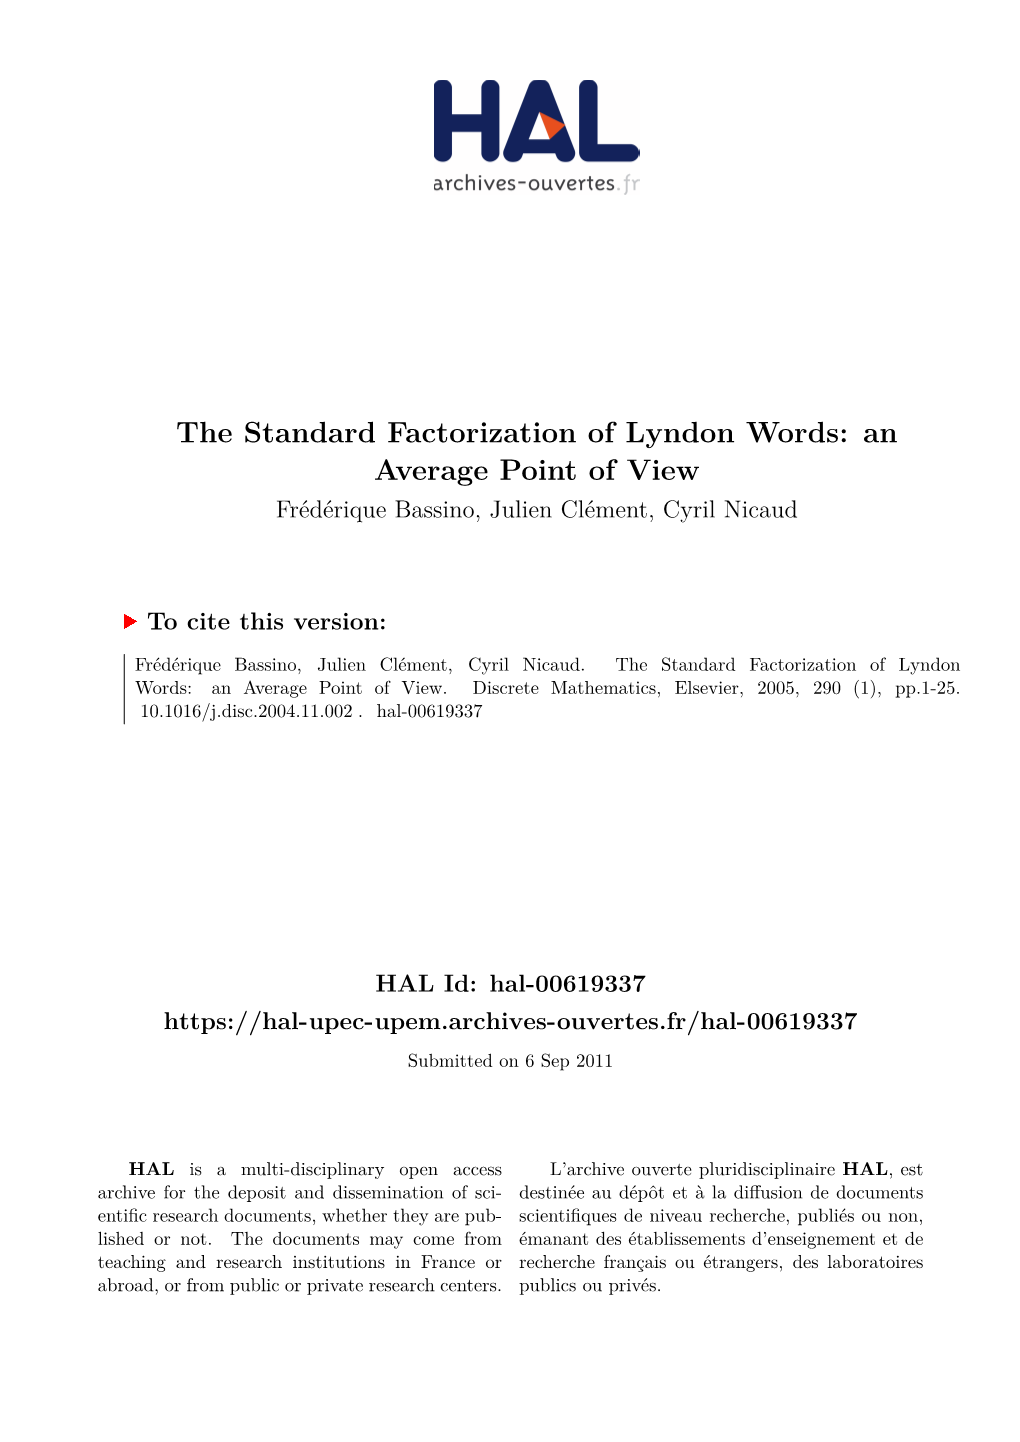 The Standard Factorization of Lyndon Words: an Average Point of View Frédérique Bassino, Julien Clément, Cyril Nicaud